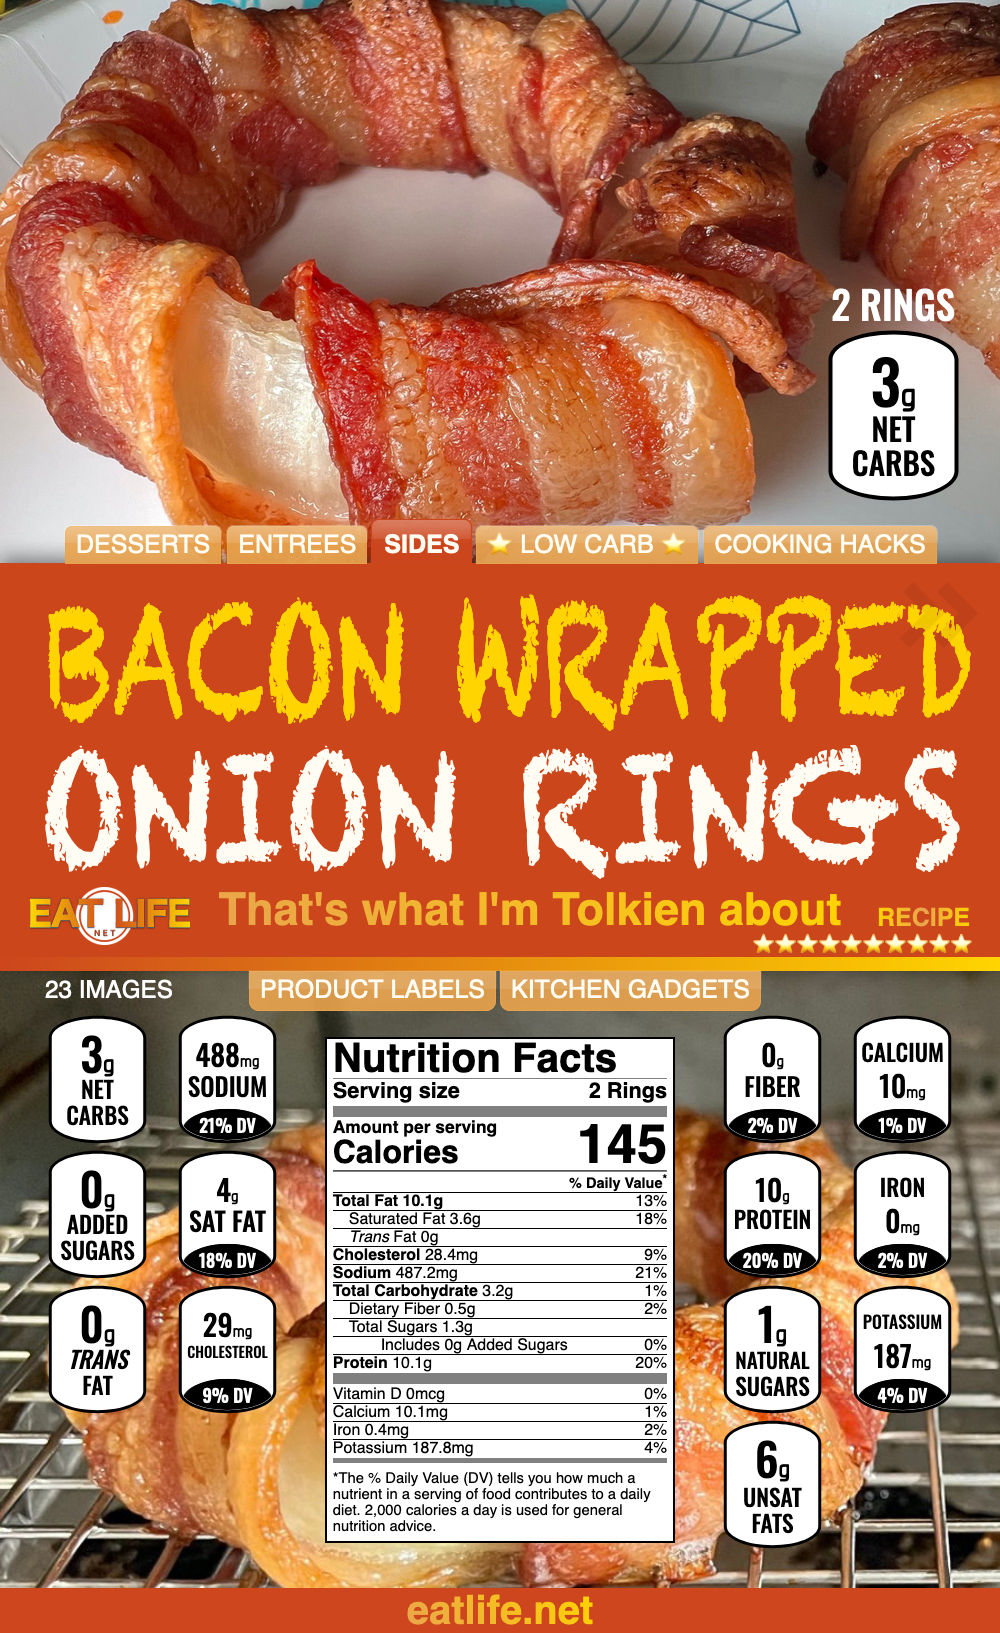 Bacon Wrapped Onion Rings